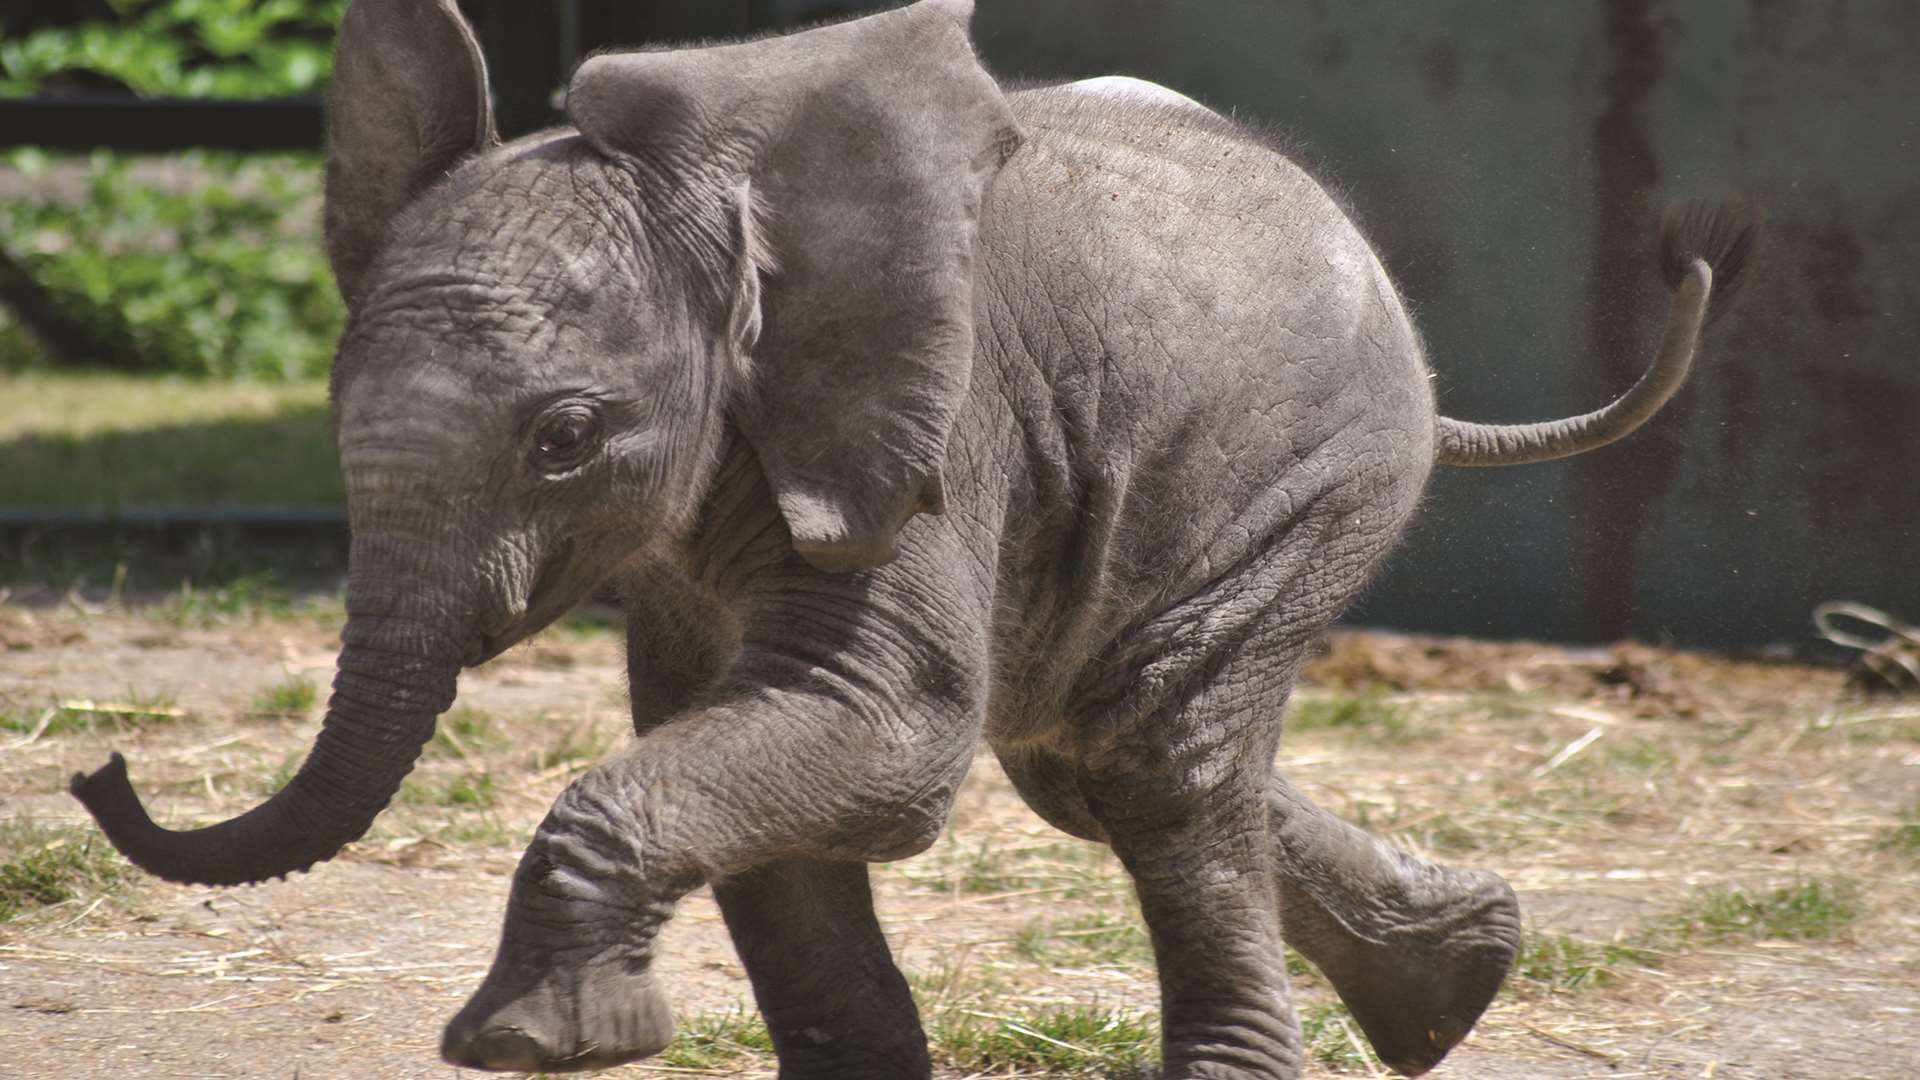 See some new arrivals this Easter holidays at Howletts Wild Animal Park, near Canterbury